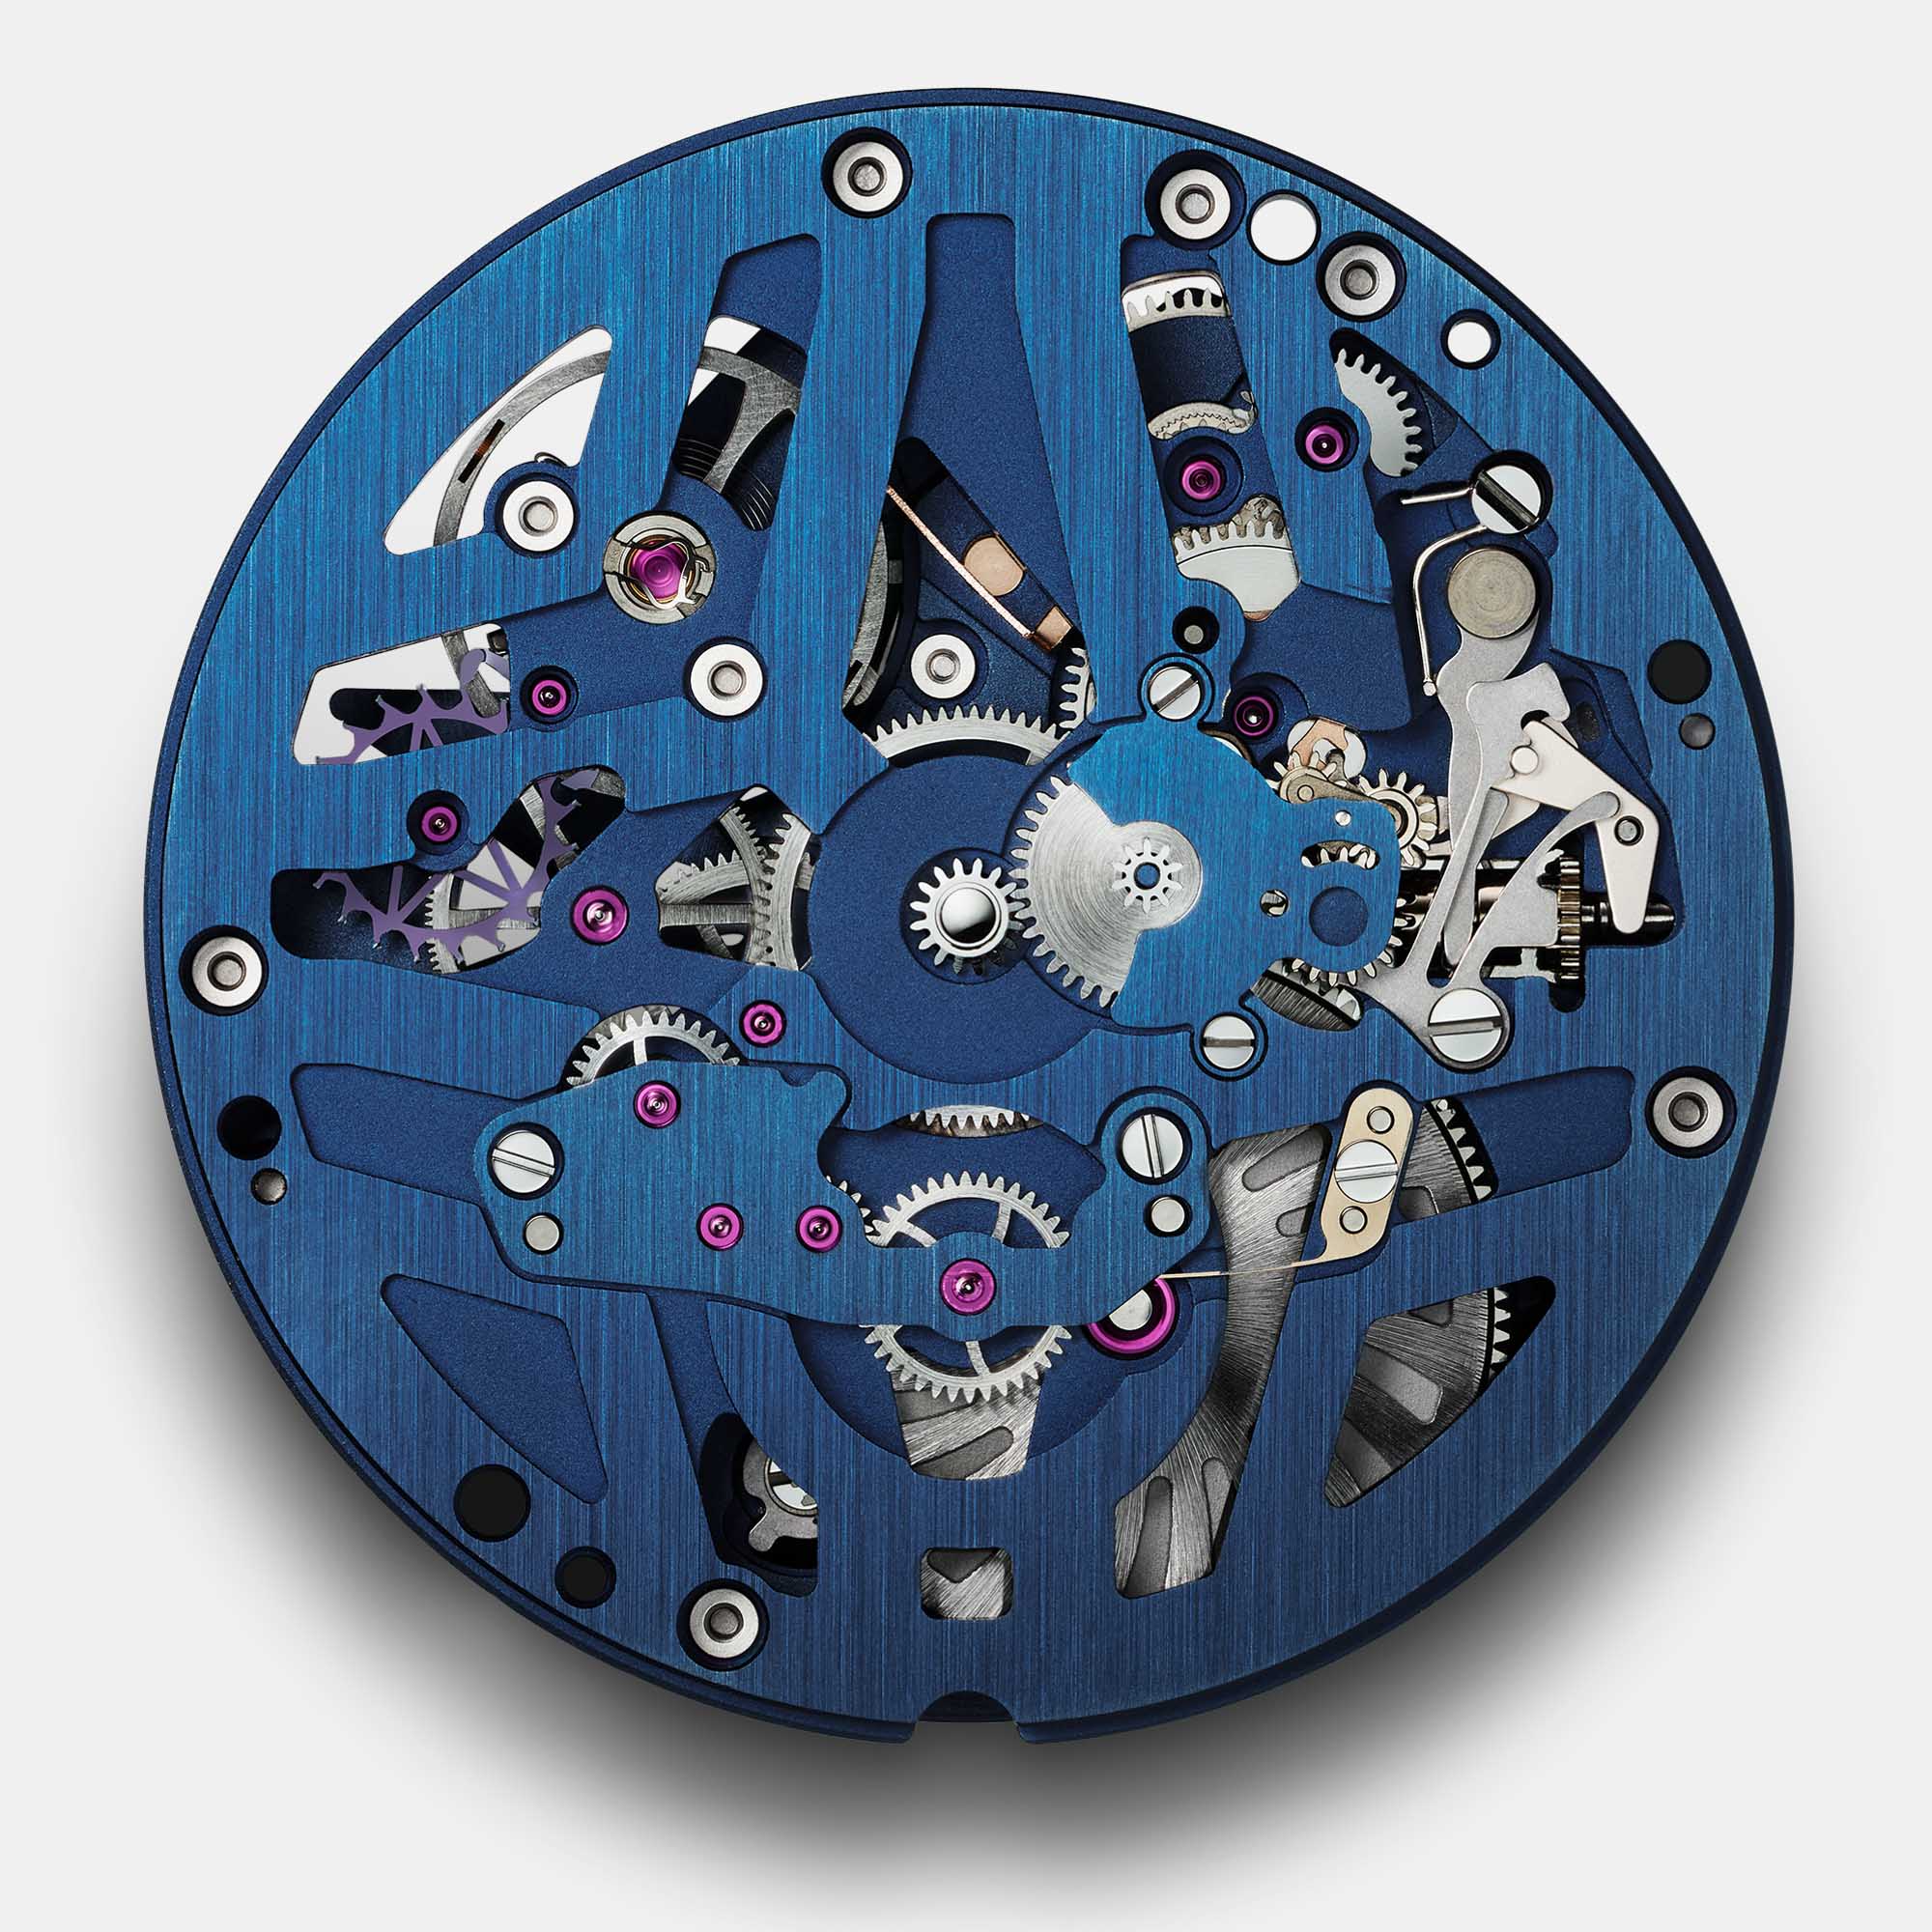 Defy Skyline Skeleton Boutique Edition - MYWATCHSITE